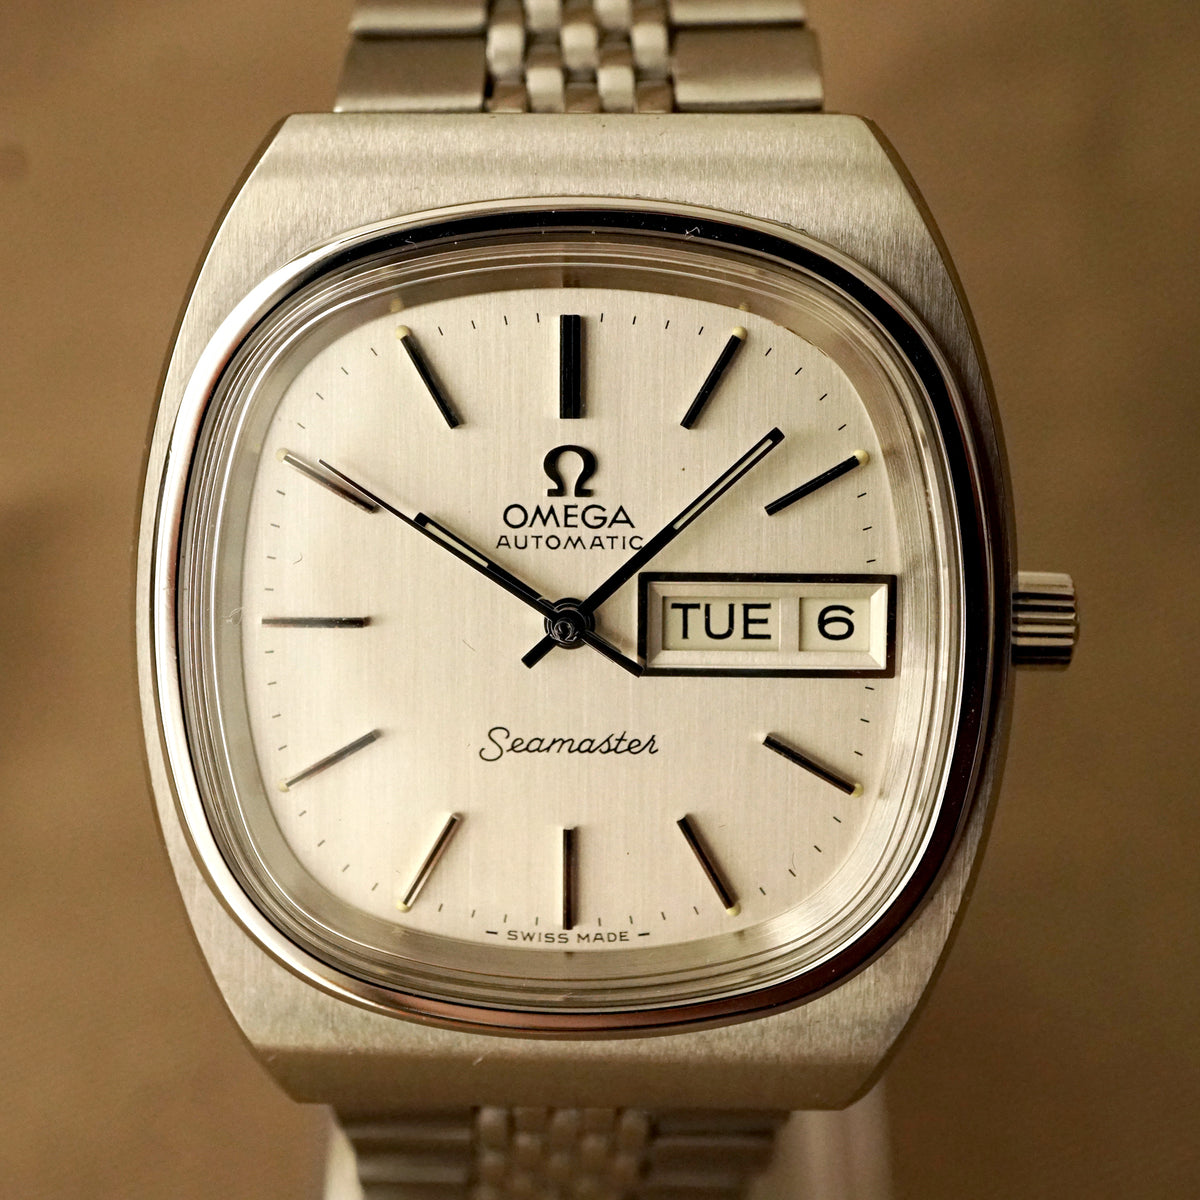 1979 OMEGA SEAMASTER 166.0211.1 TV AUTOMATIC COMPLETE SERVICED NOS ...